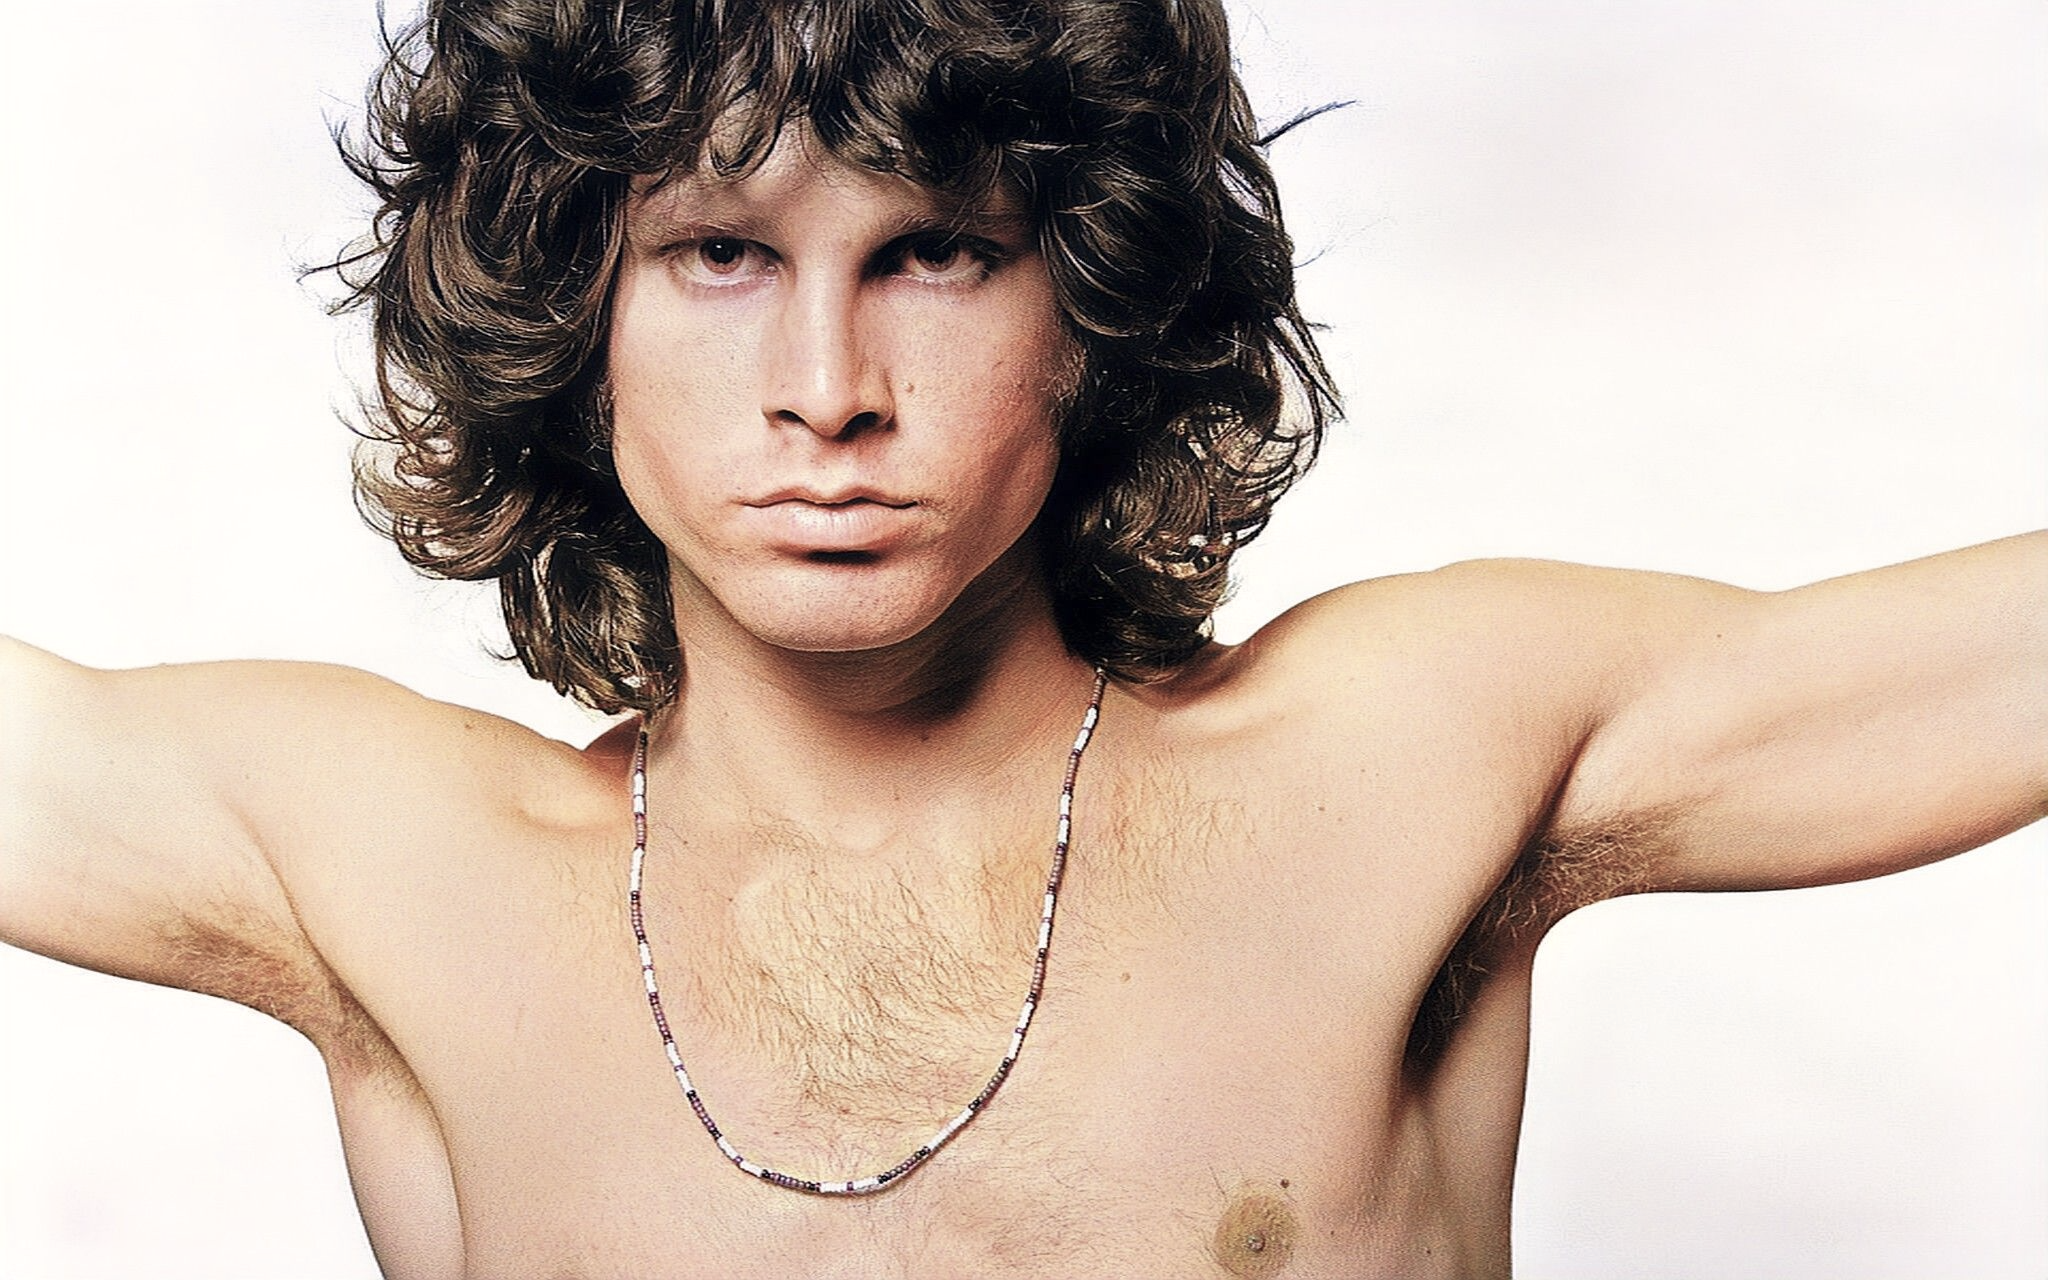 The sexuality of Jim Morrison image